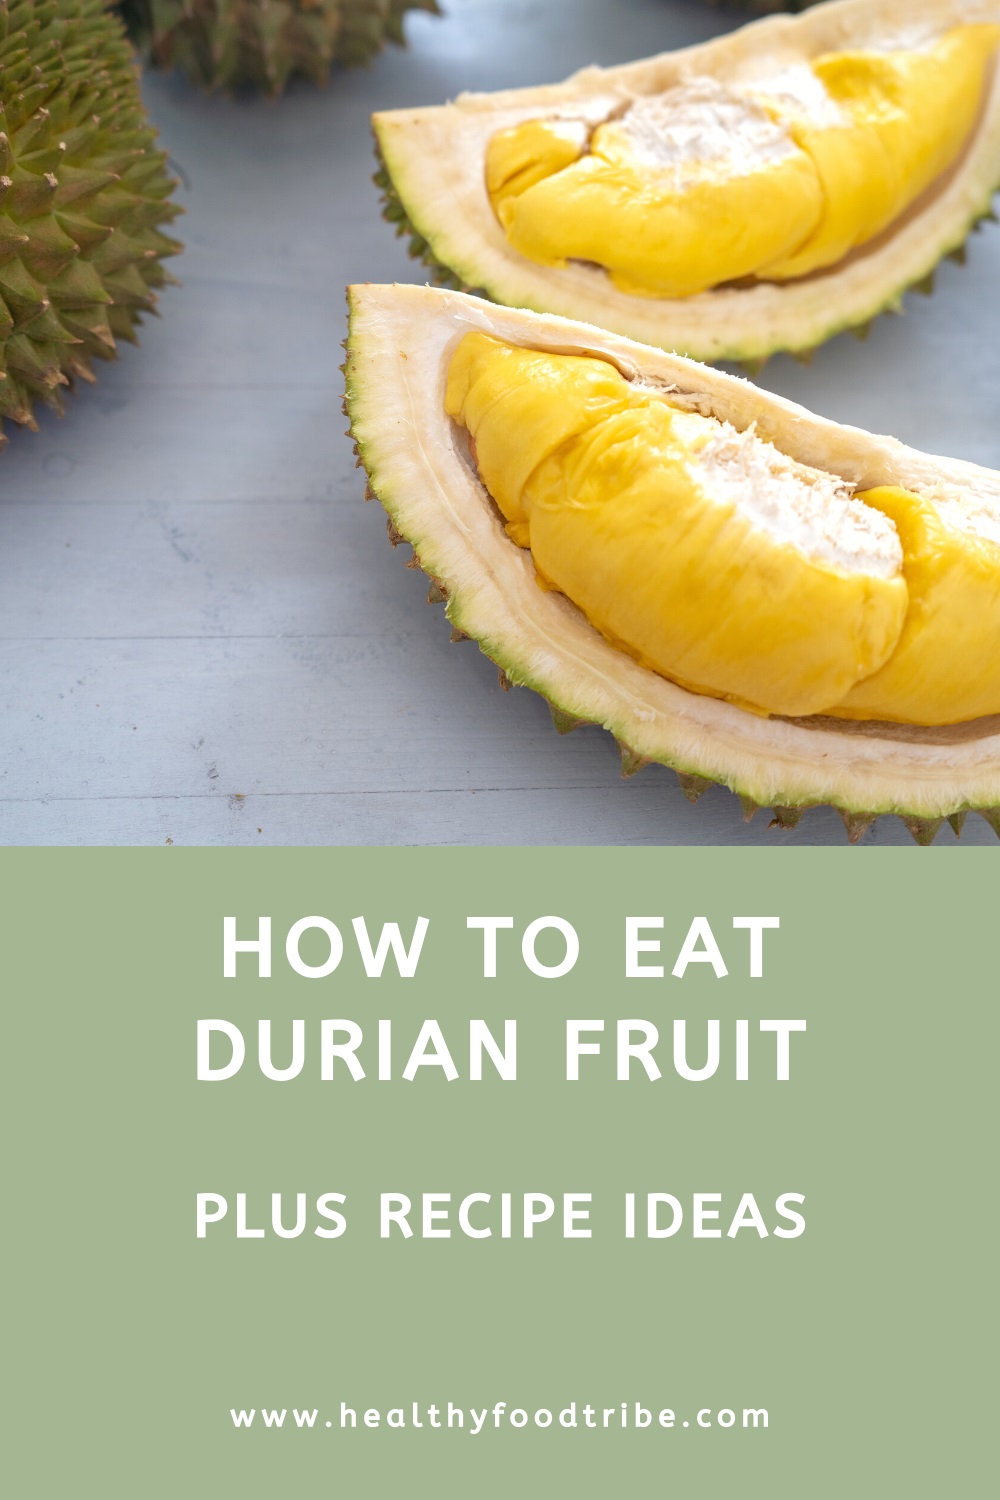 How to cut and eat a durian fruit (plus recipe ideas)